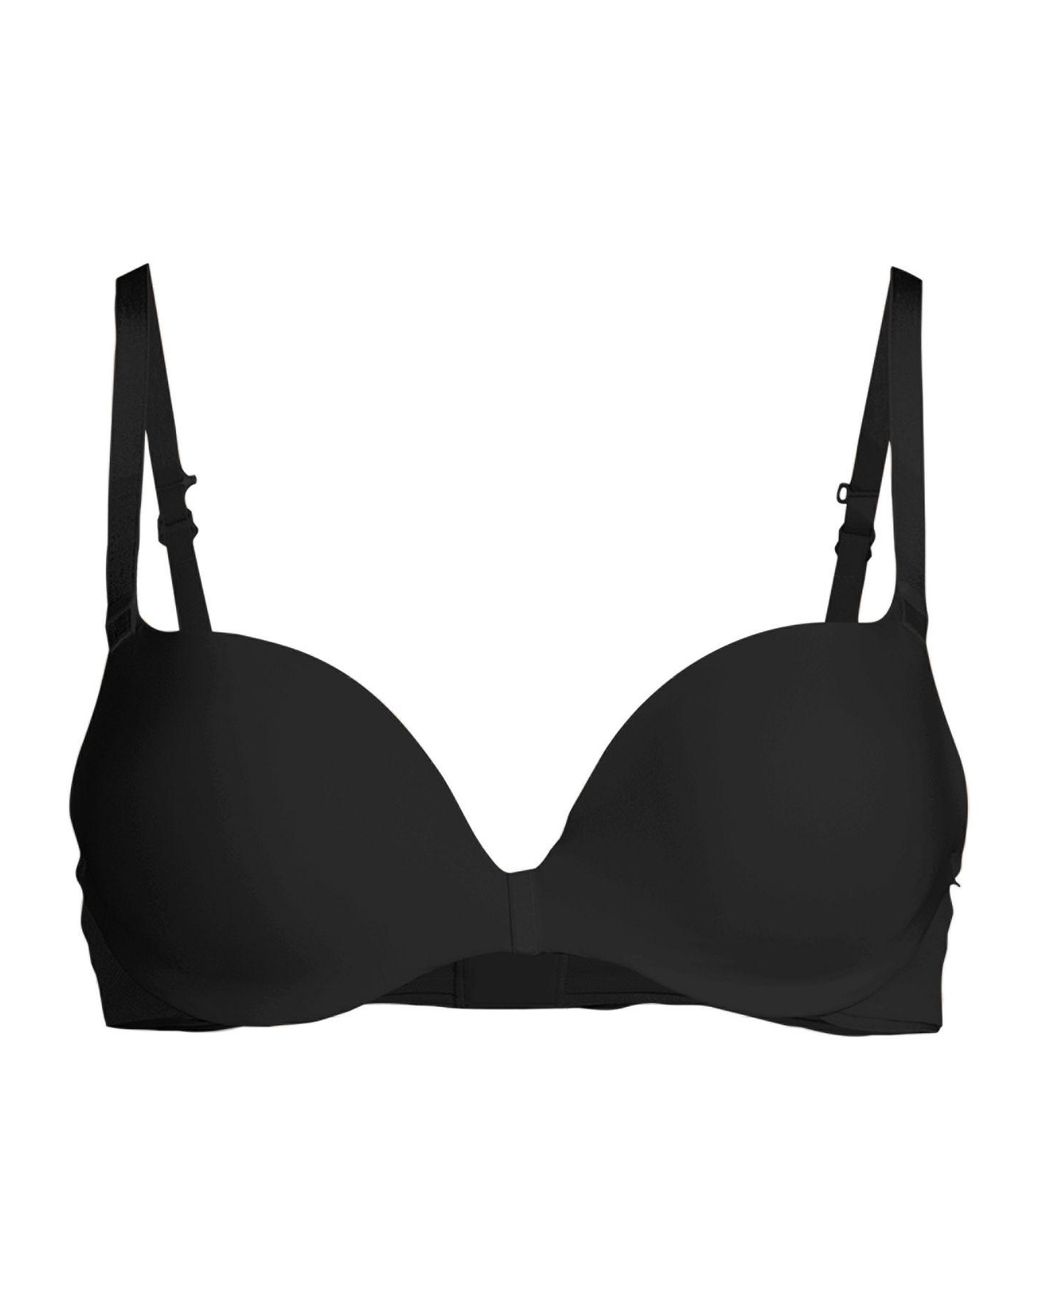 Chantelle Absolute Invisible Smooth Push Up Bra in Black - Lyst